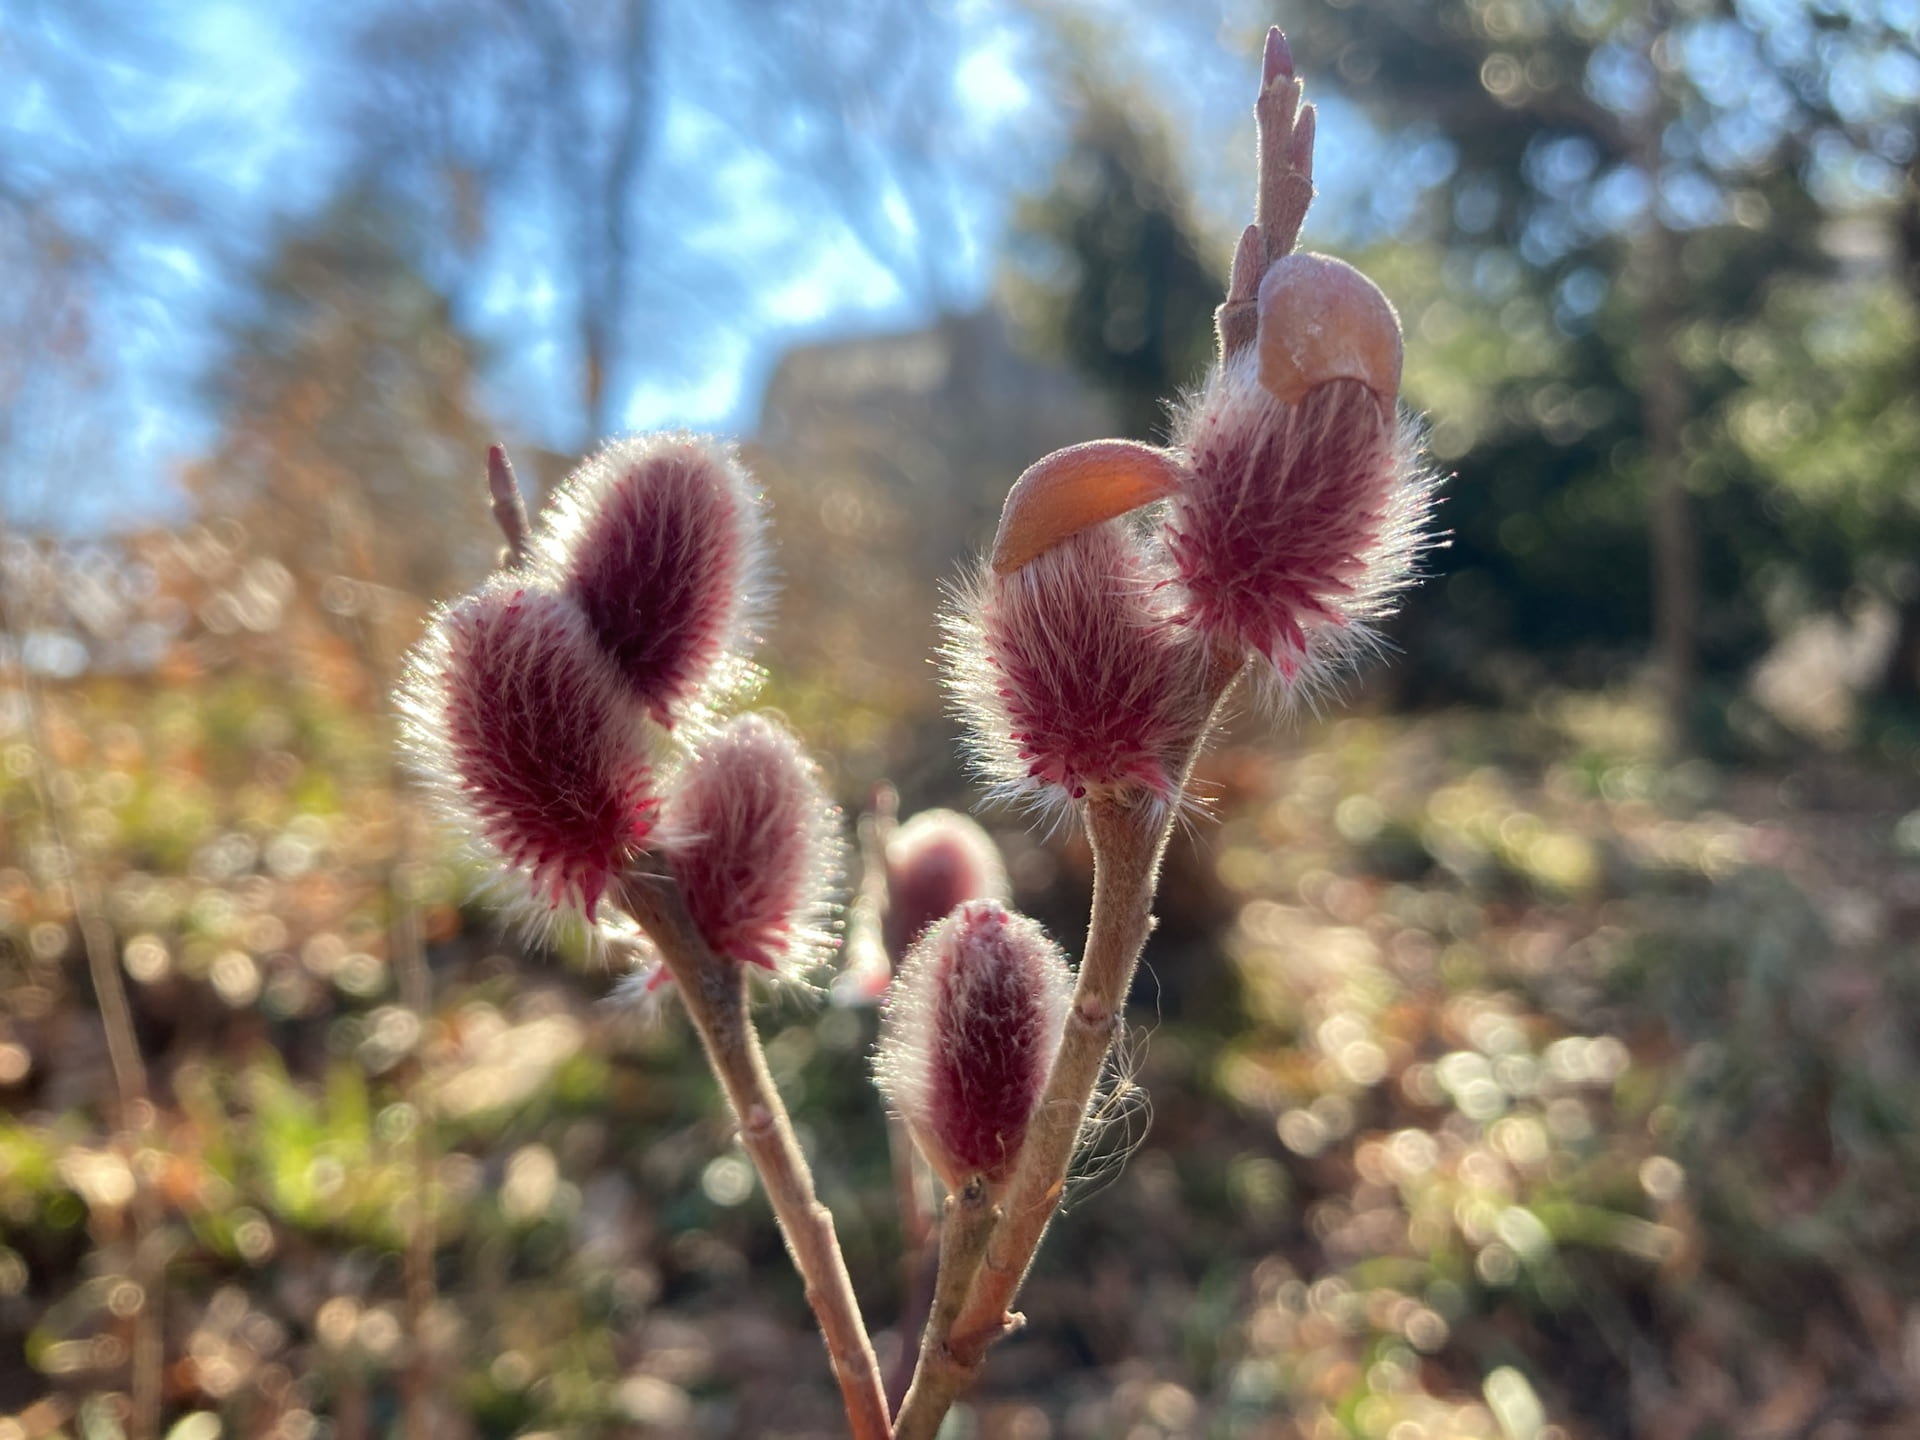 Salix gracilistyla 'Mt. Aso' blooms with fuzzy pink catkins that flower in late winter.